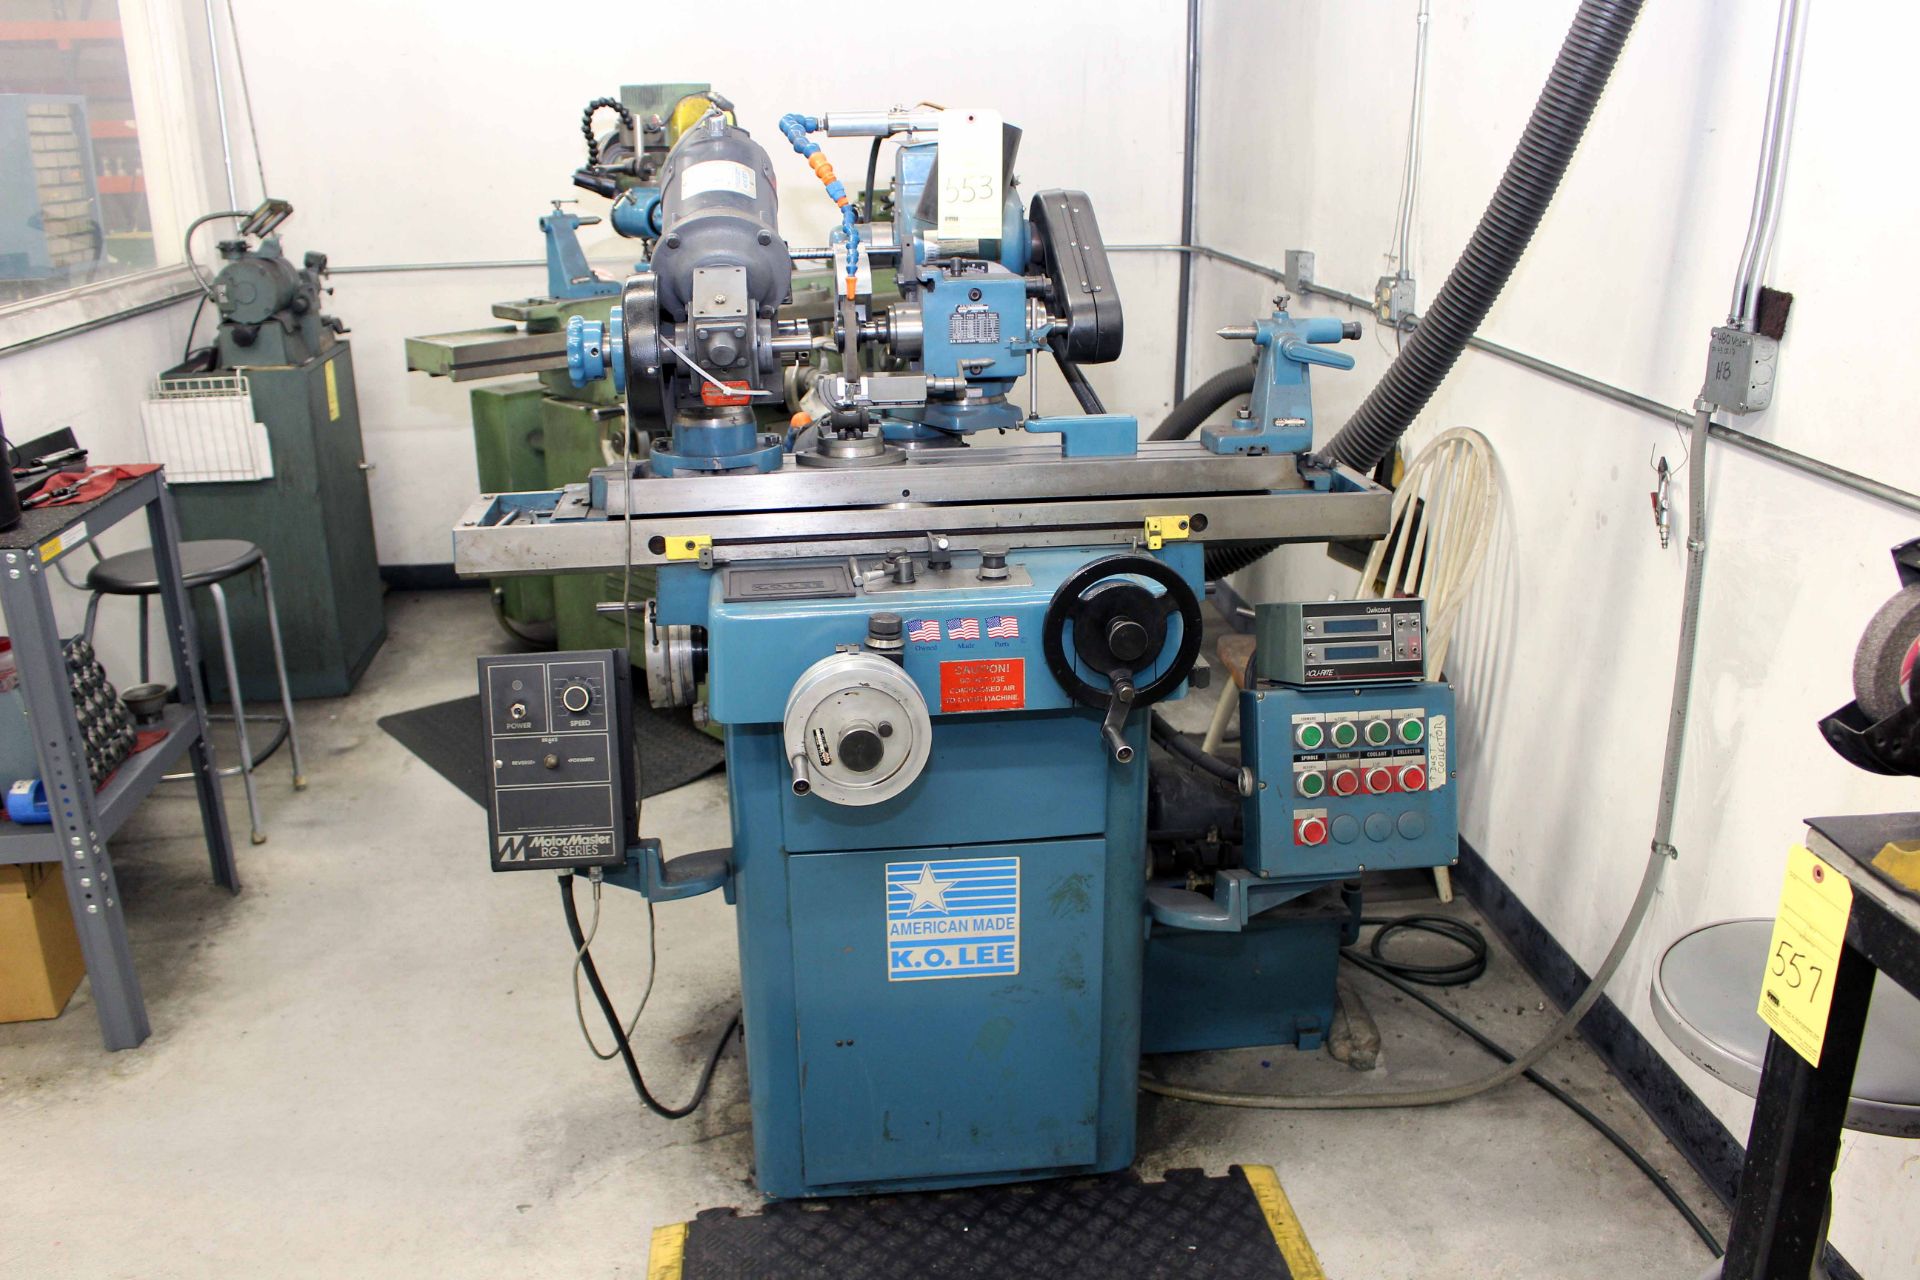 TOOL & CUTTER GRINDER, K.O. LEE MDL. B6060H535, pwr. rotary workhead, 2-axis D.R.O., extended length